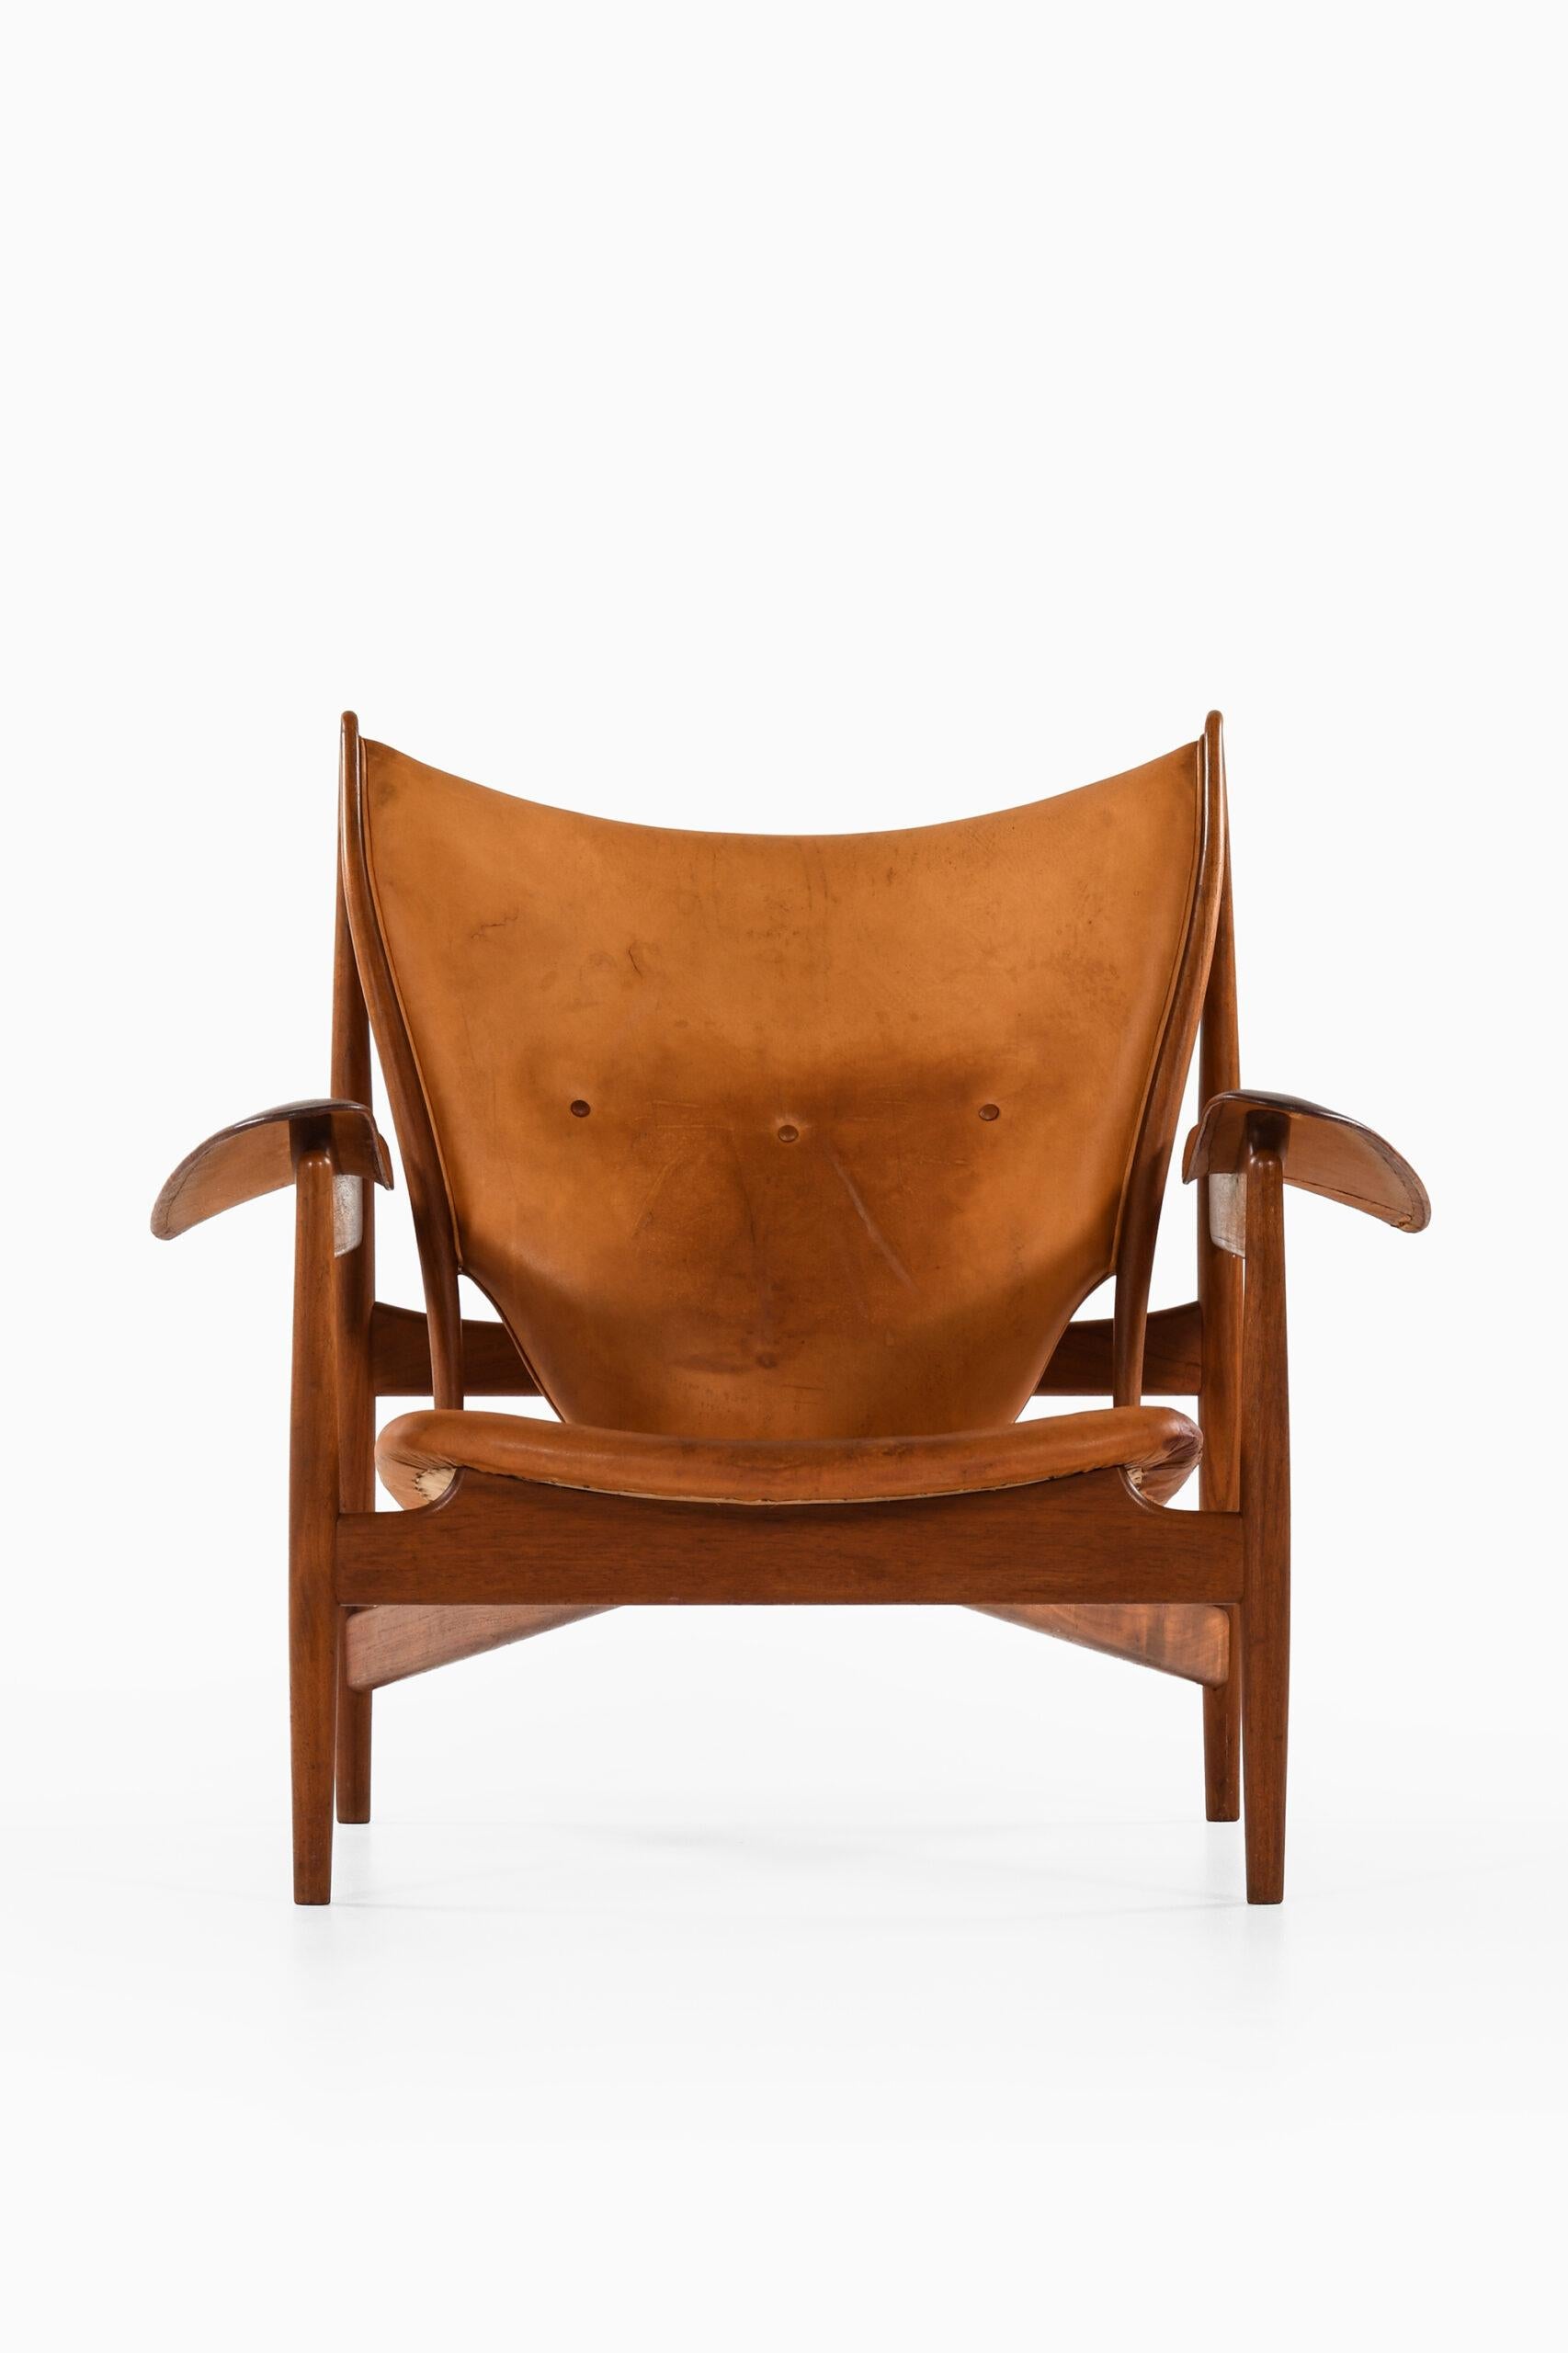 Very rare Chieftain easy chair designed by Finn Juhl. Produced by cabinetmaker Niels Vodder in Denmark.
 